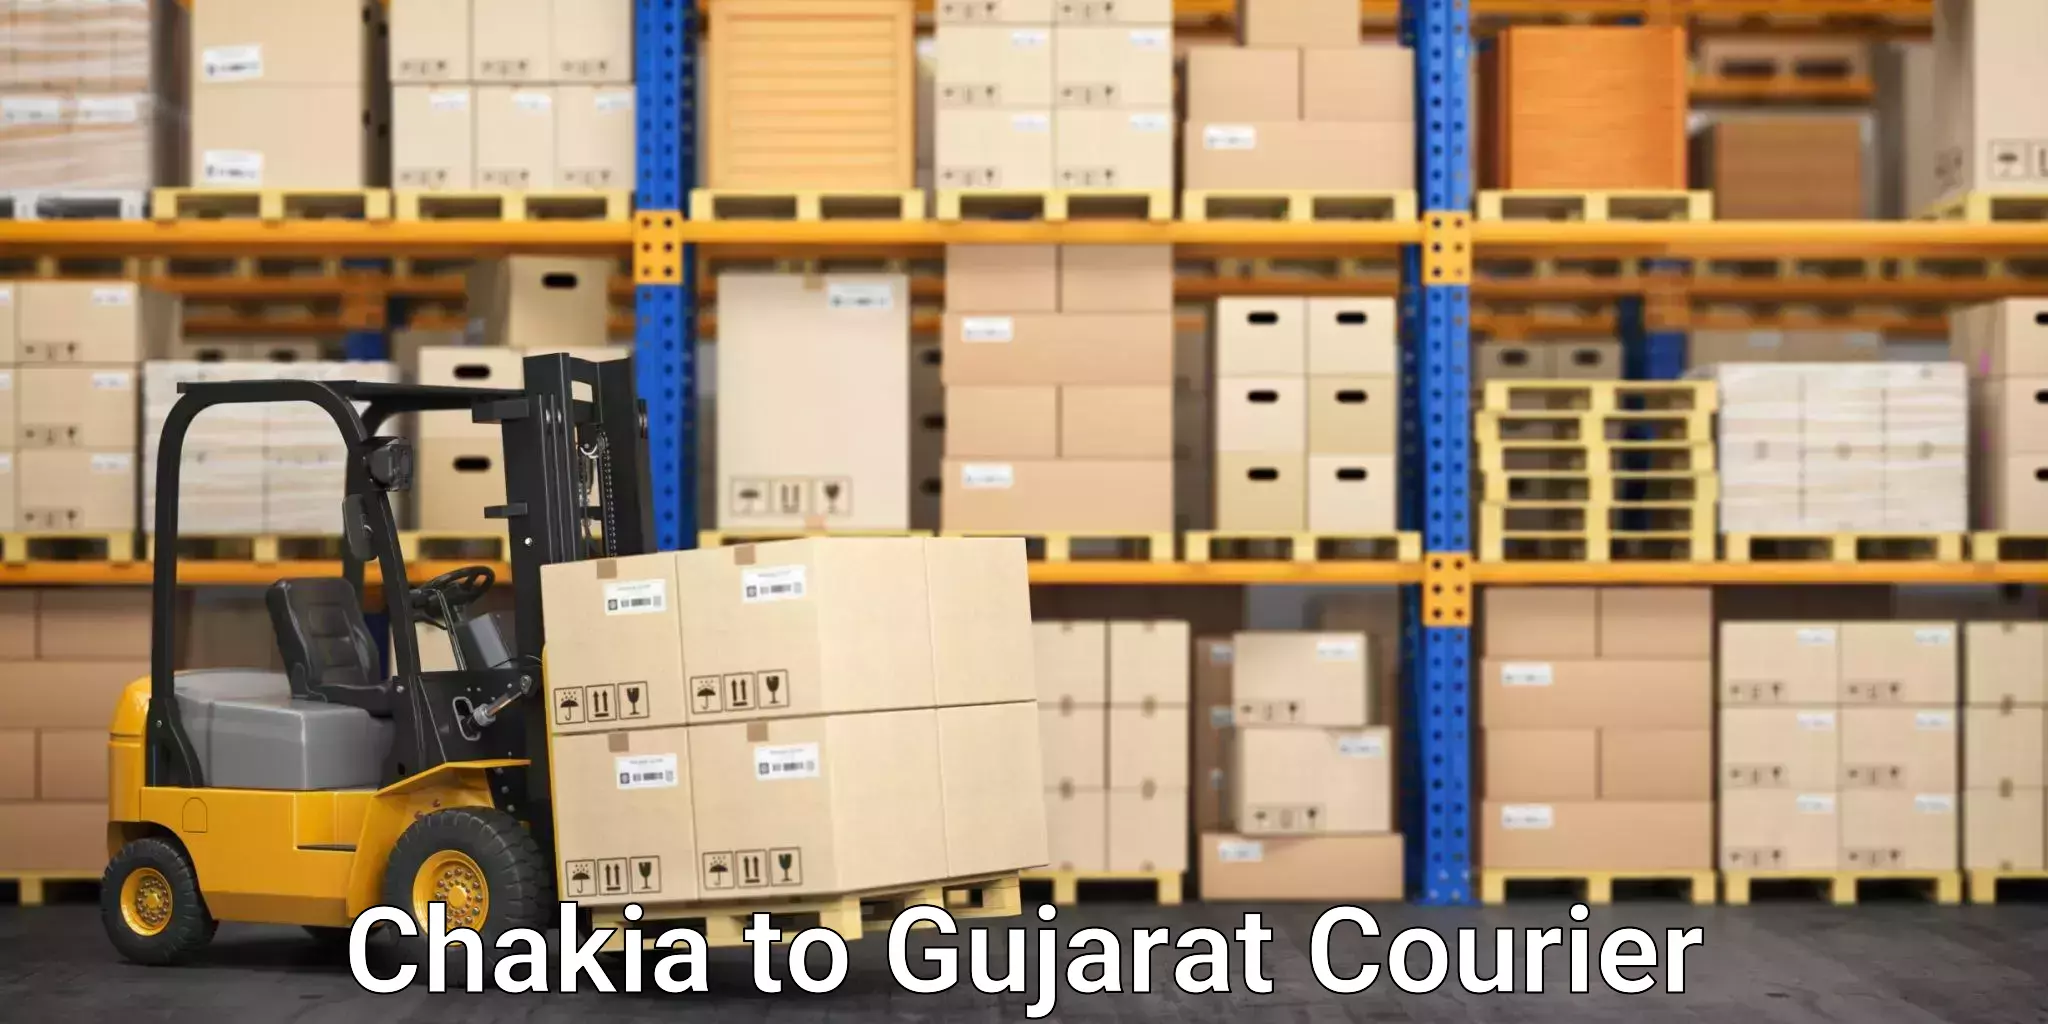 Moving and storage services in Chakia to Gujarat